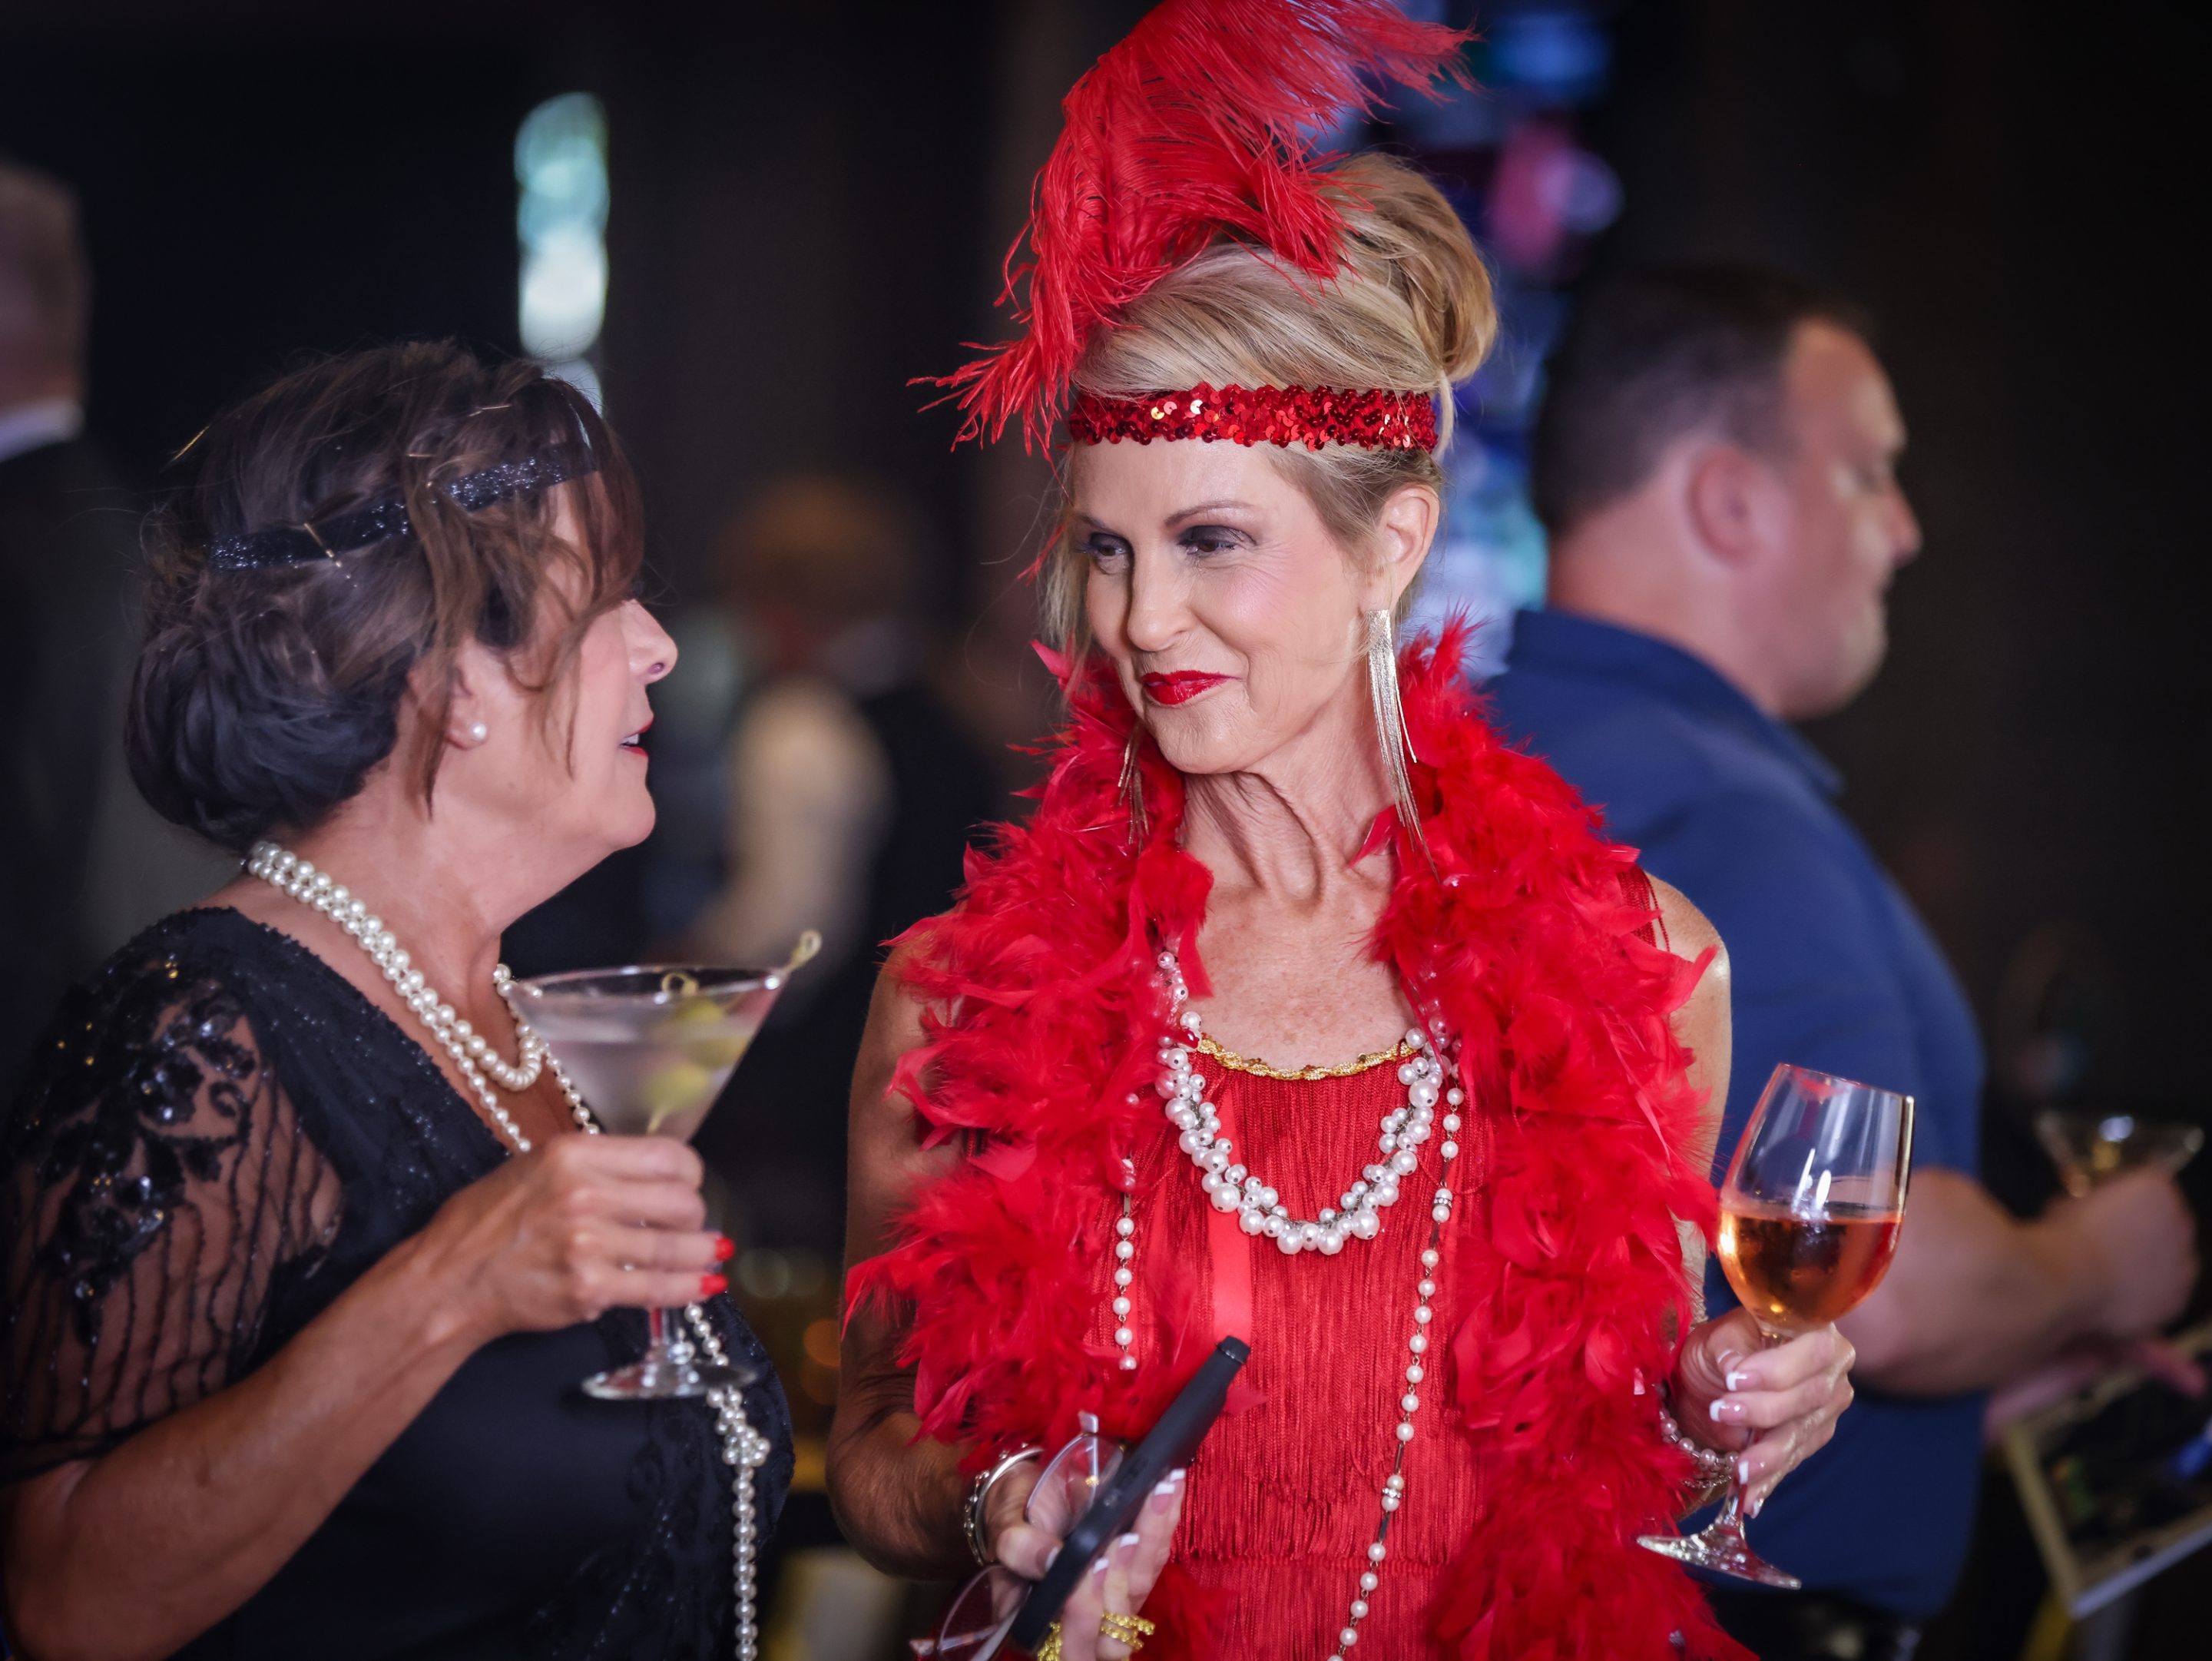 At the party, two women dressed in red and feathers are discussing, possibly affiliated with The LIME Foundation of Santa Rosa.